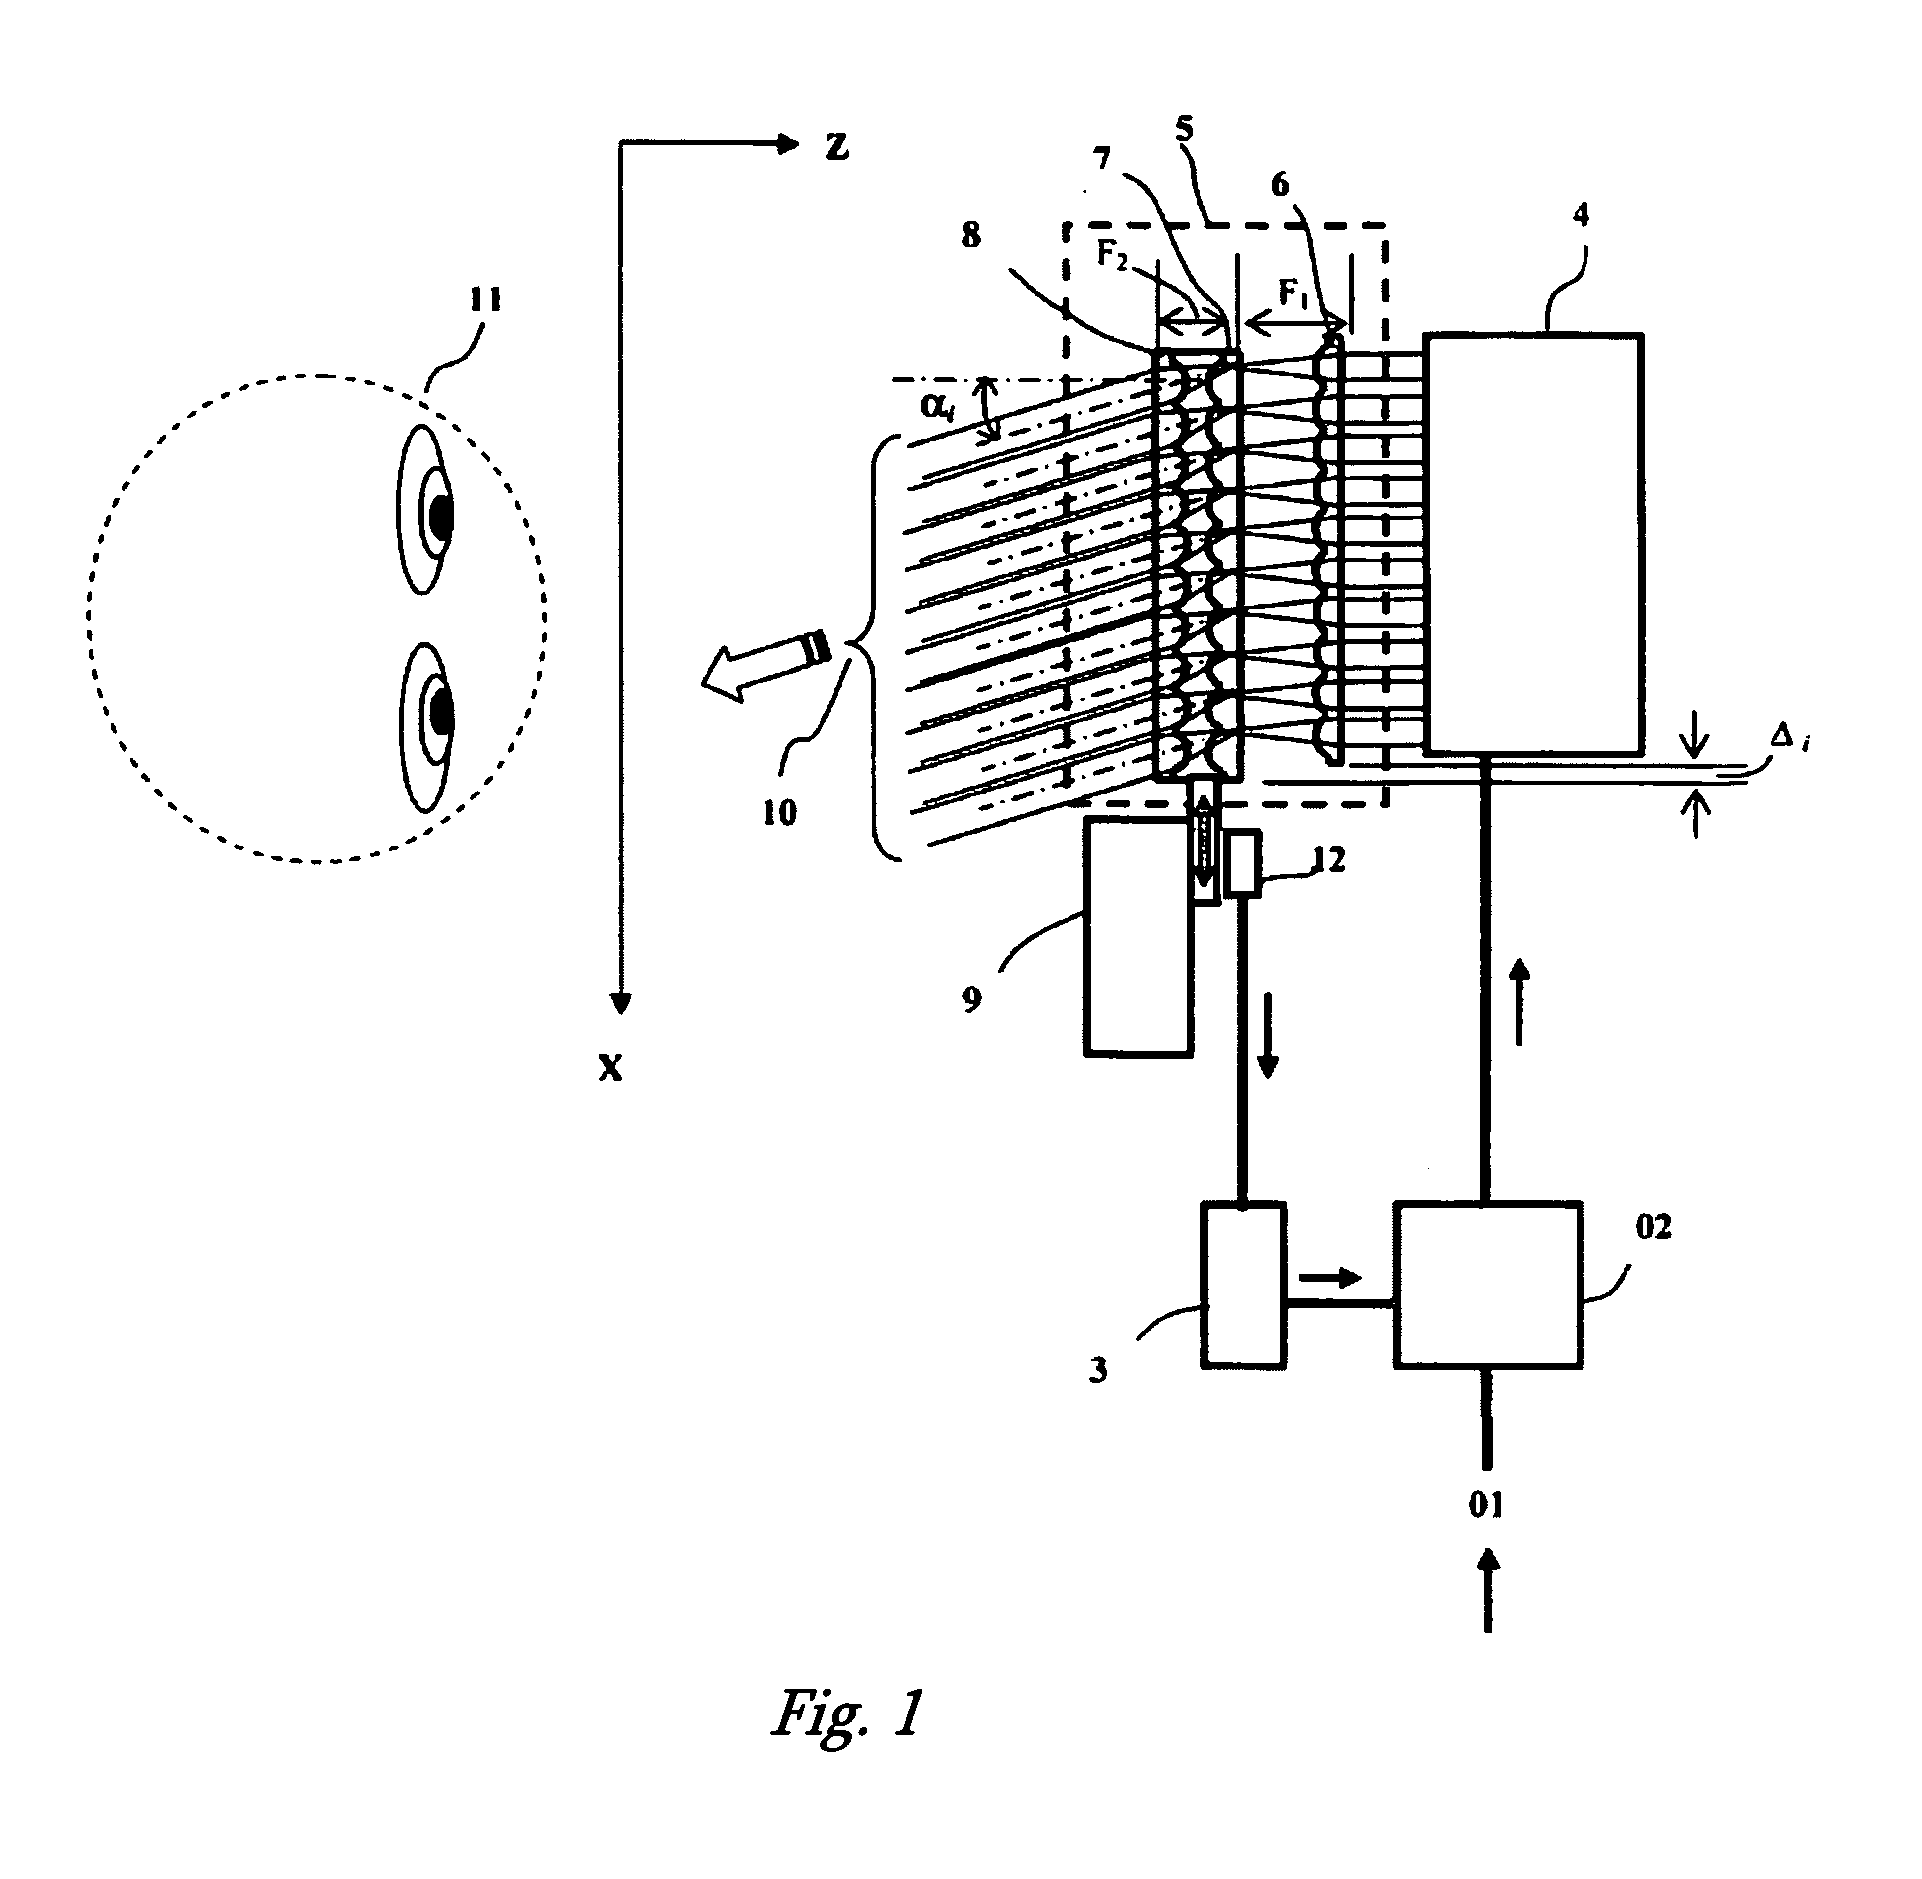 Apparatus and system for reproducing 3-dimensional images